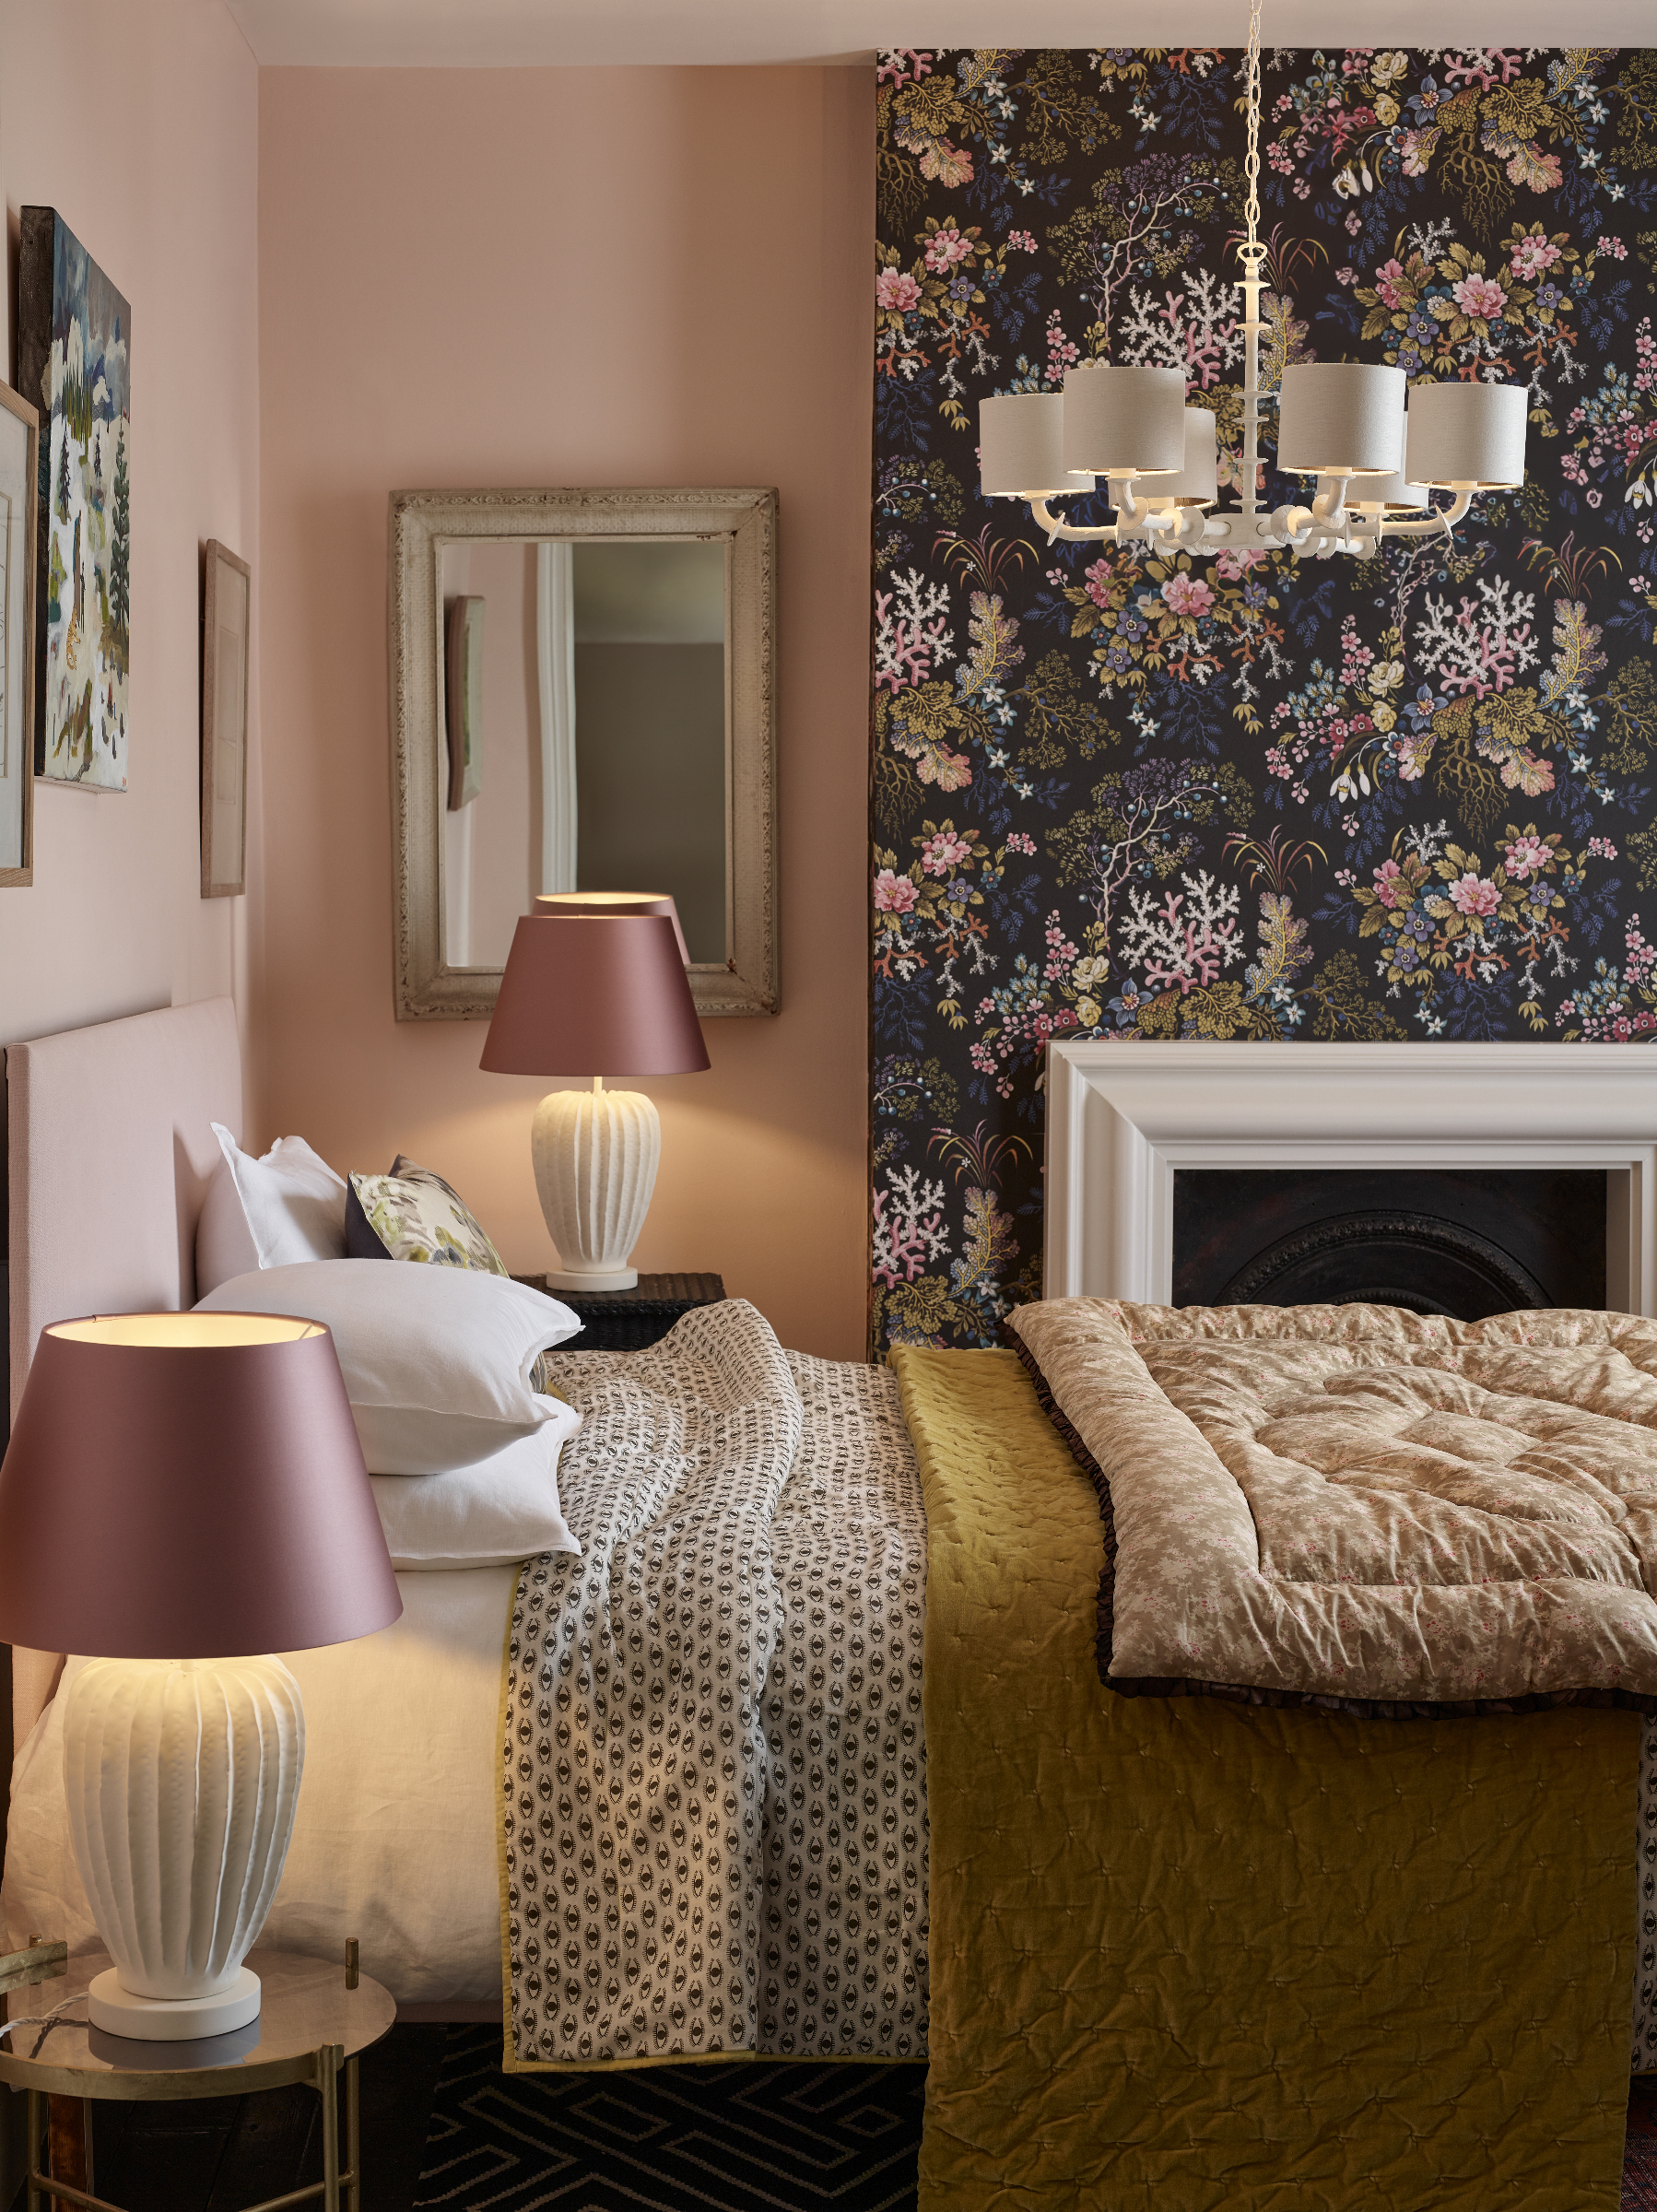 Pale pink bedroom with dark wallpaper panel and white table lamps with pink shades